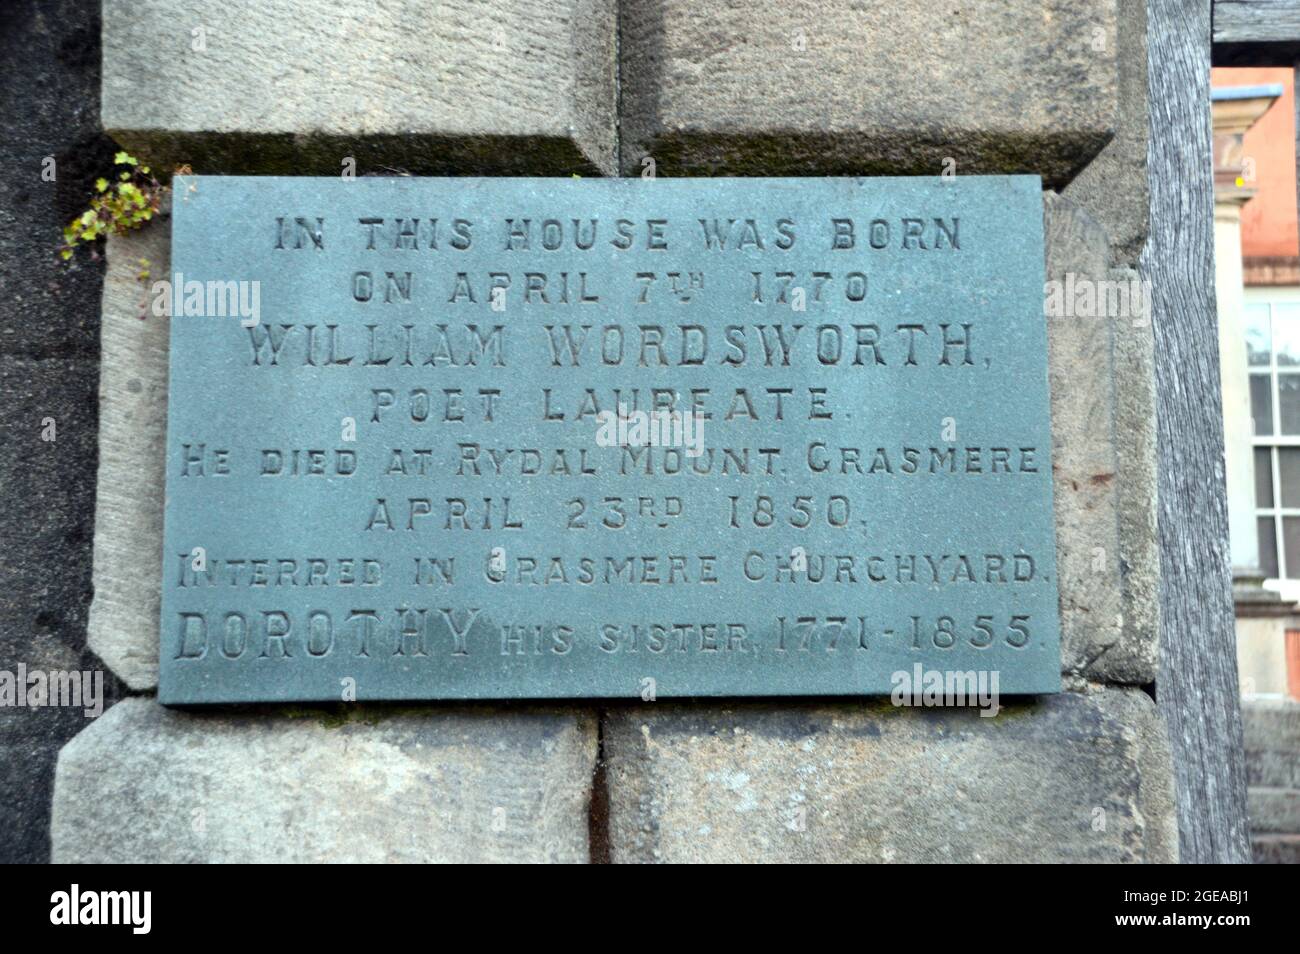 Wordsworth House in Cockermouth is the Birthplace and Childhood home English poet William Wordsworth in the Lake District, Cumbria, England, UK. Stock Photo